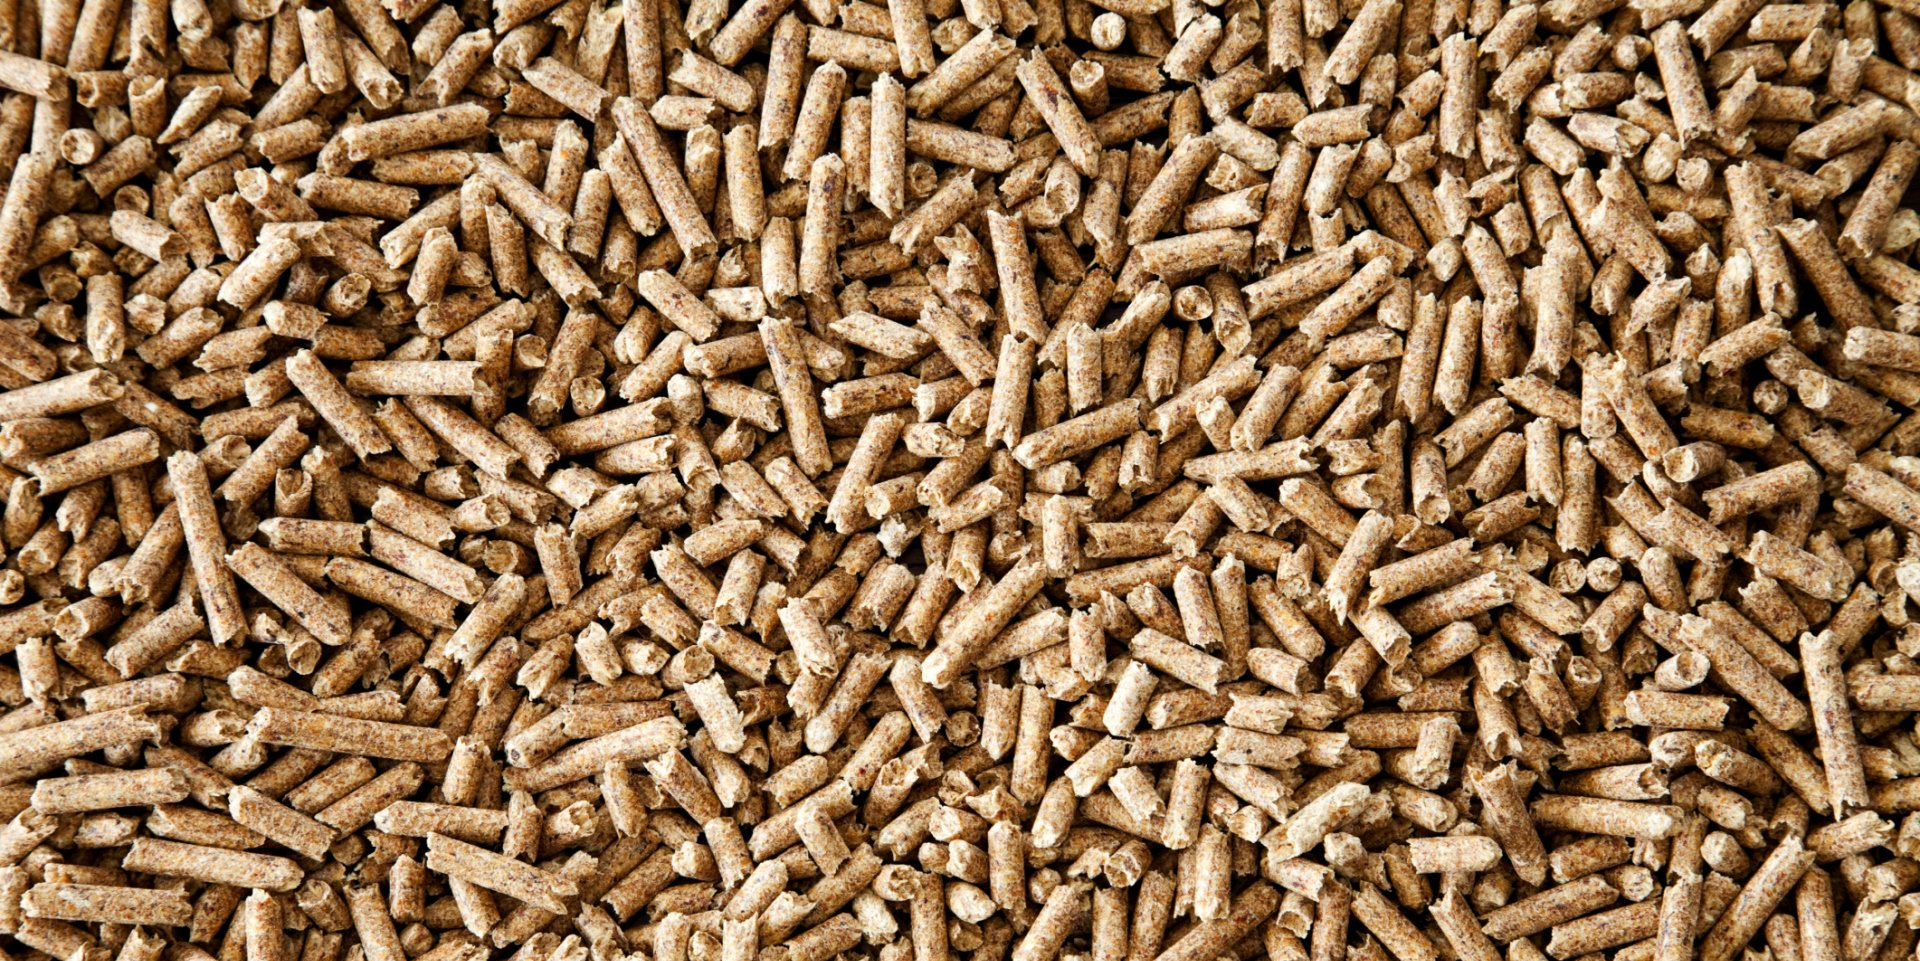 A close-up view of wood pellets